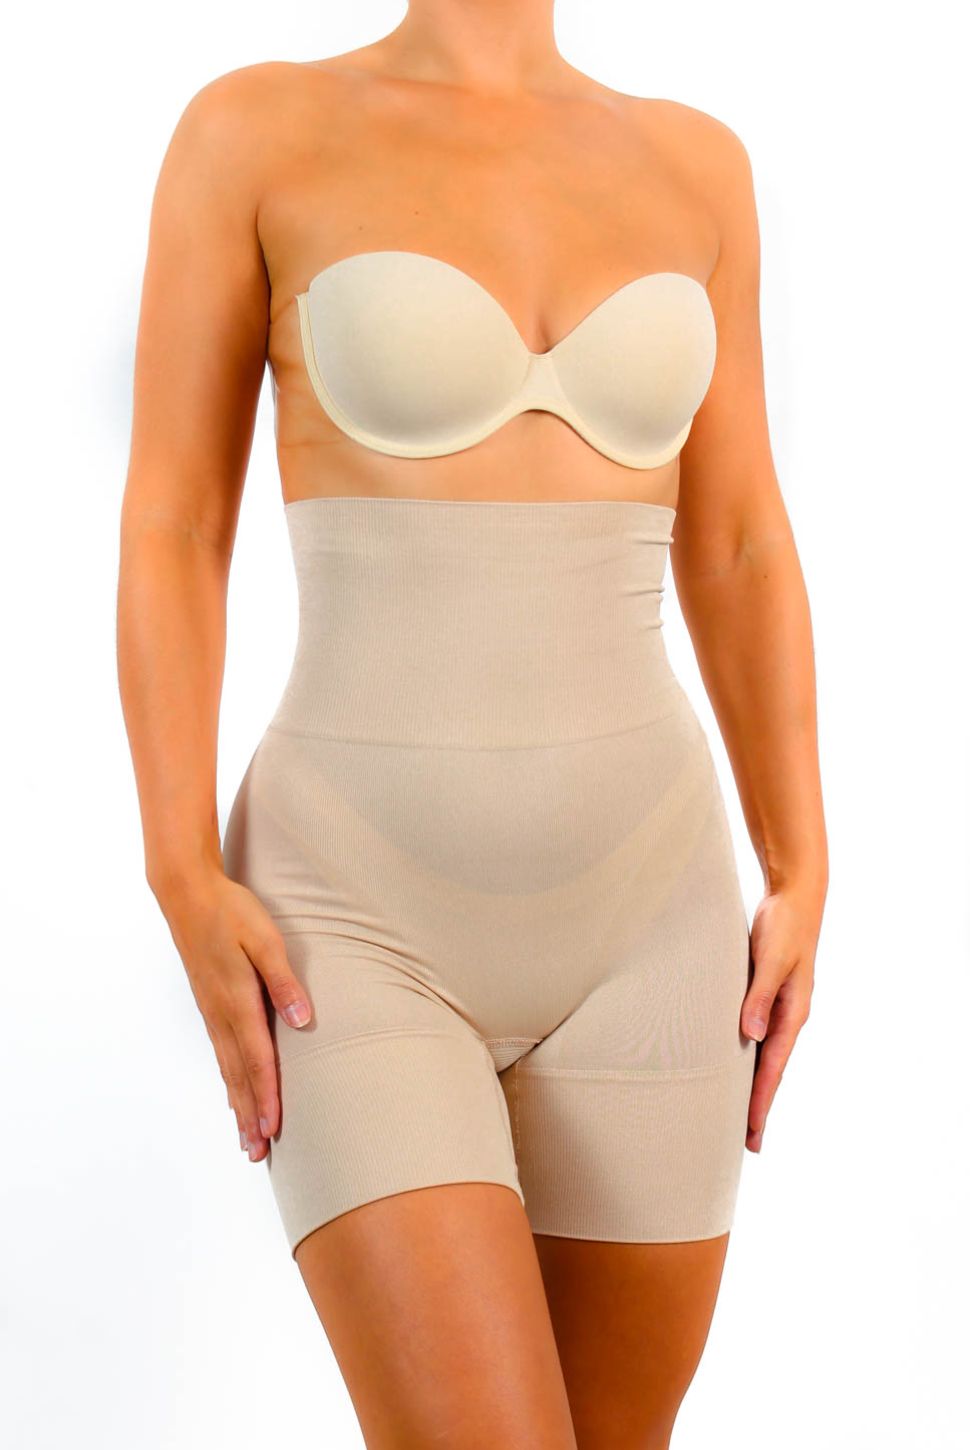 Lover-Beauty Body Shaper for Women Tummy Control South Africa